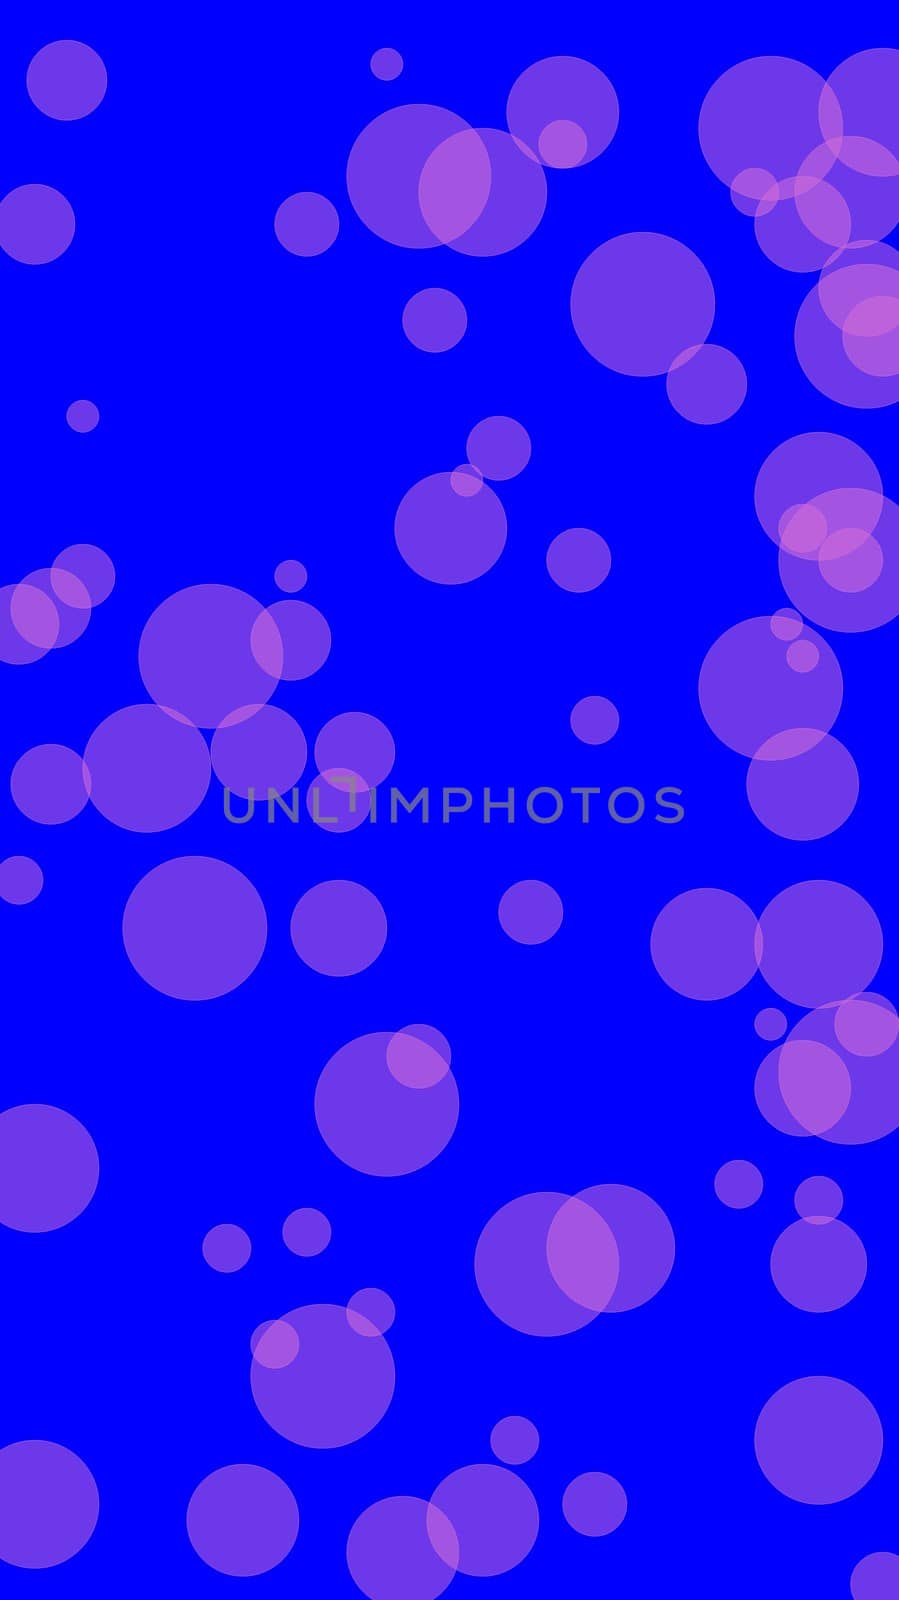 Abstract violet circles illustration background by claudiodivizia